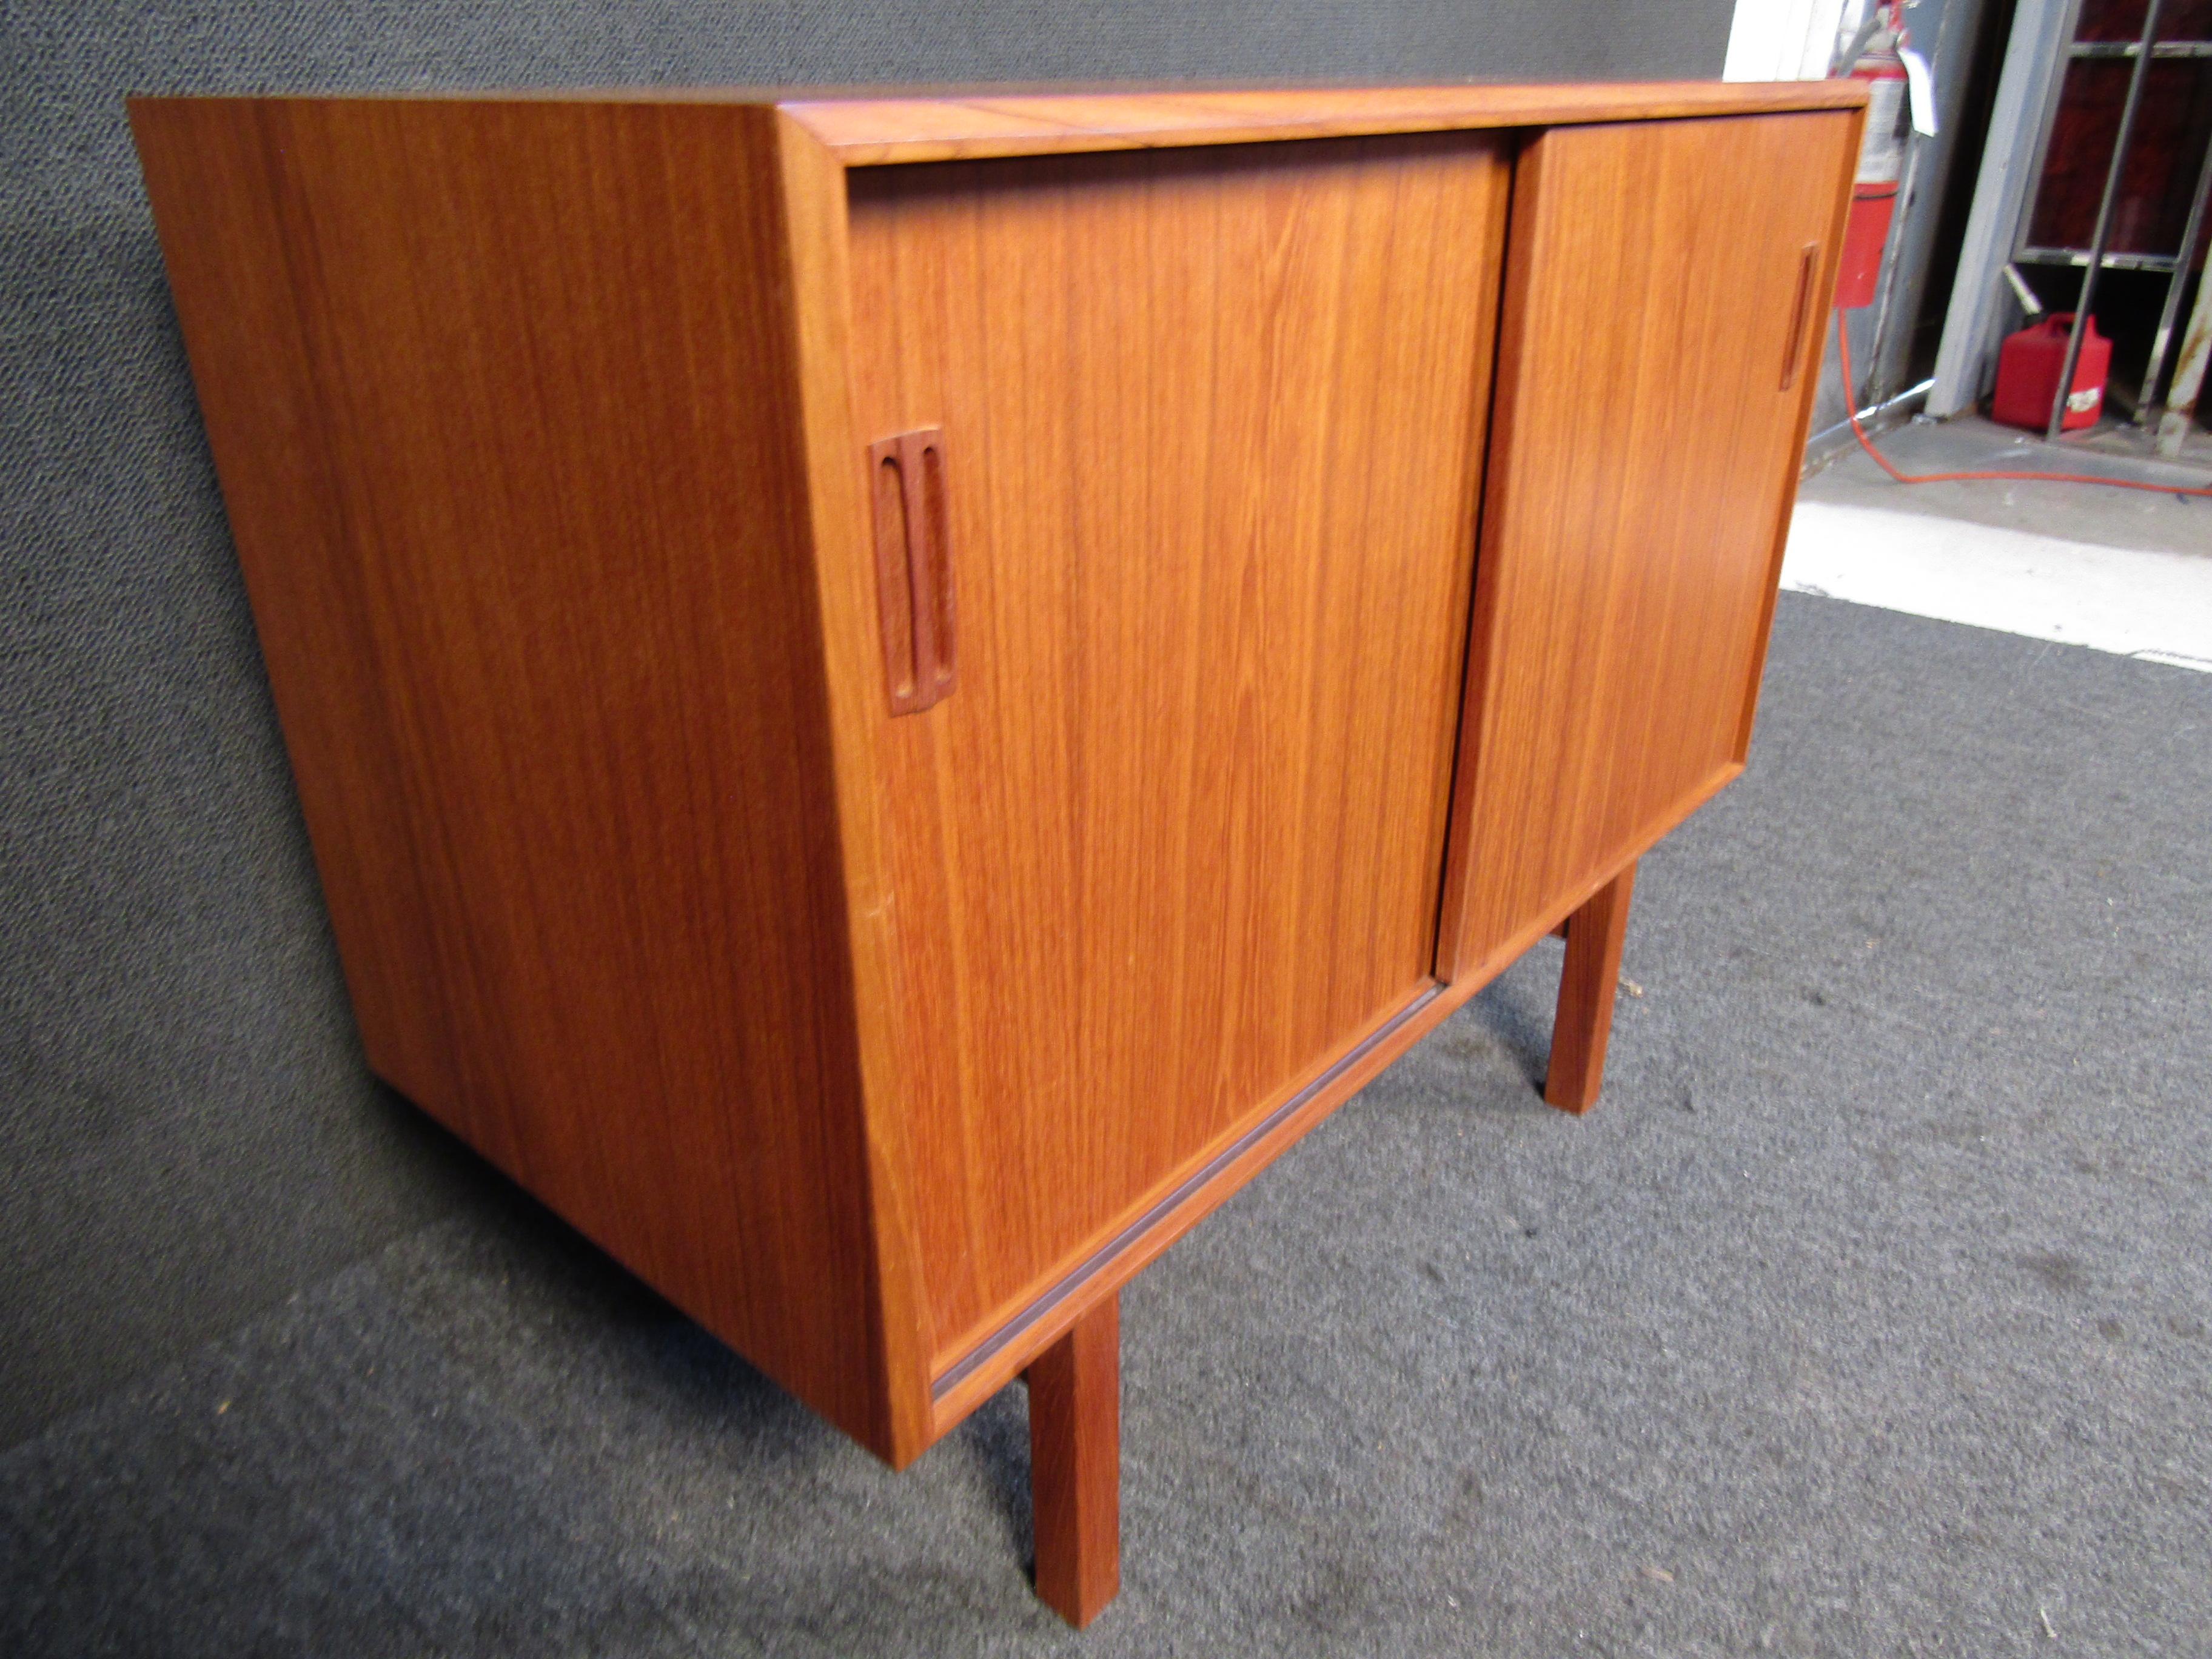 Rich teak wood is combined with an understated Mid-Century Modern design in this vintage Danish cabinet. Sliding doors reveal shelving and plenty of space for storage. Please confirm item location with seller (NY/NJ).